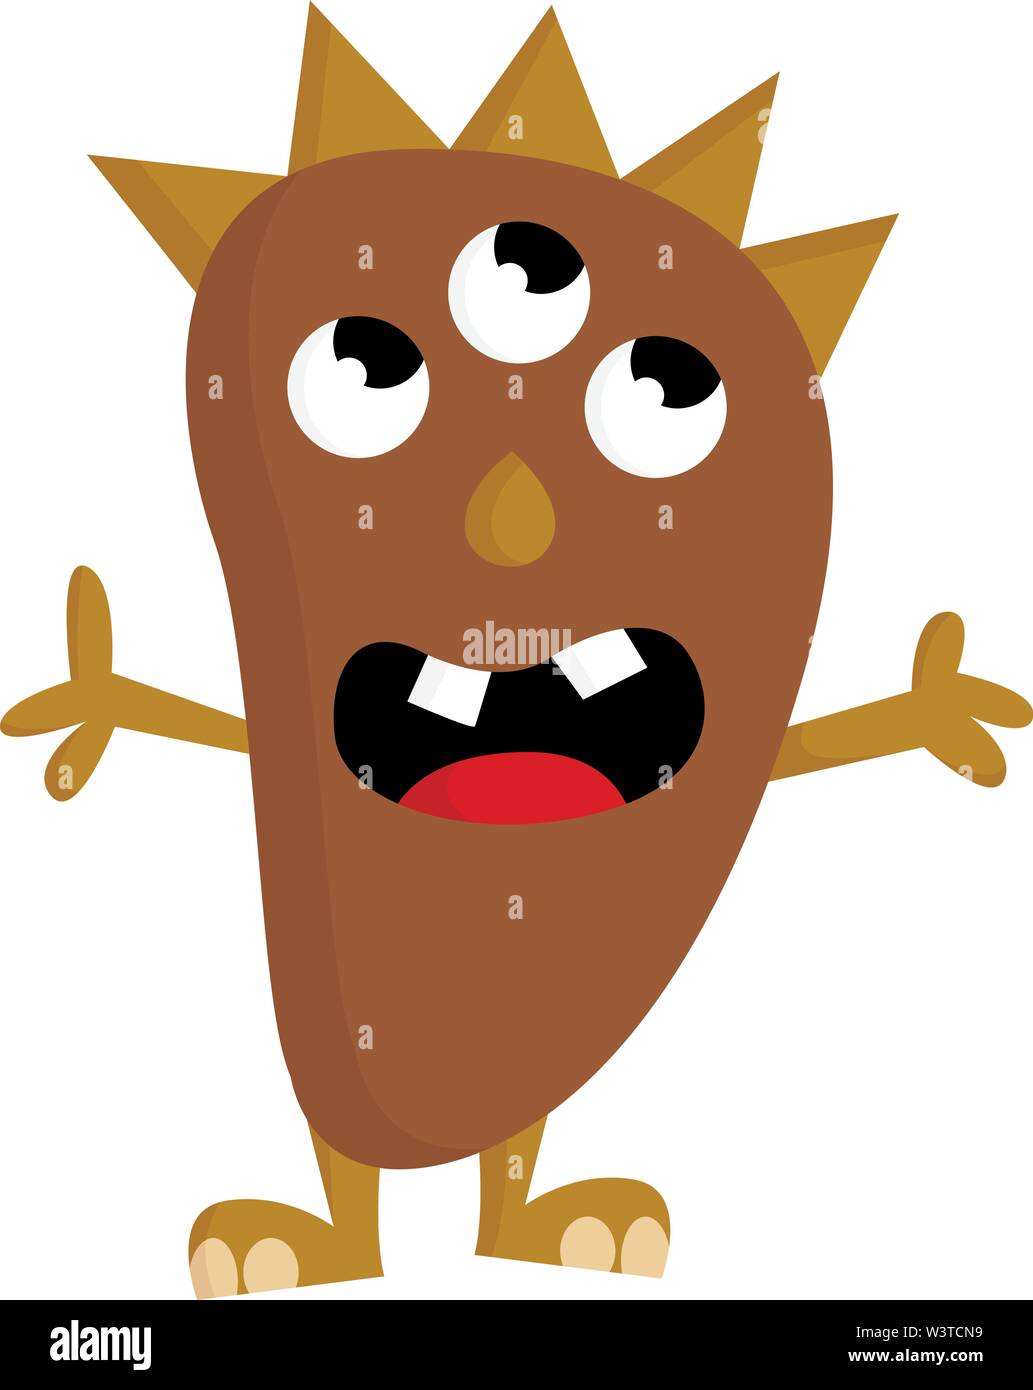 A brown monster with 3 eyes and a sharp hair, vector, color drawing or illustration. Stock Vector